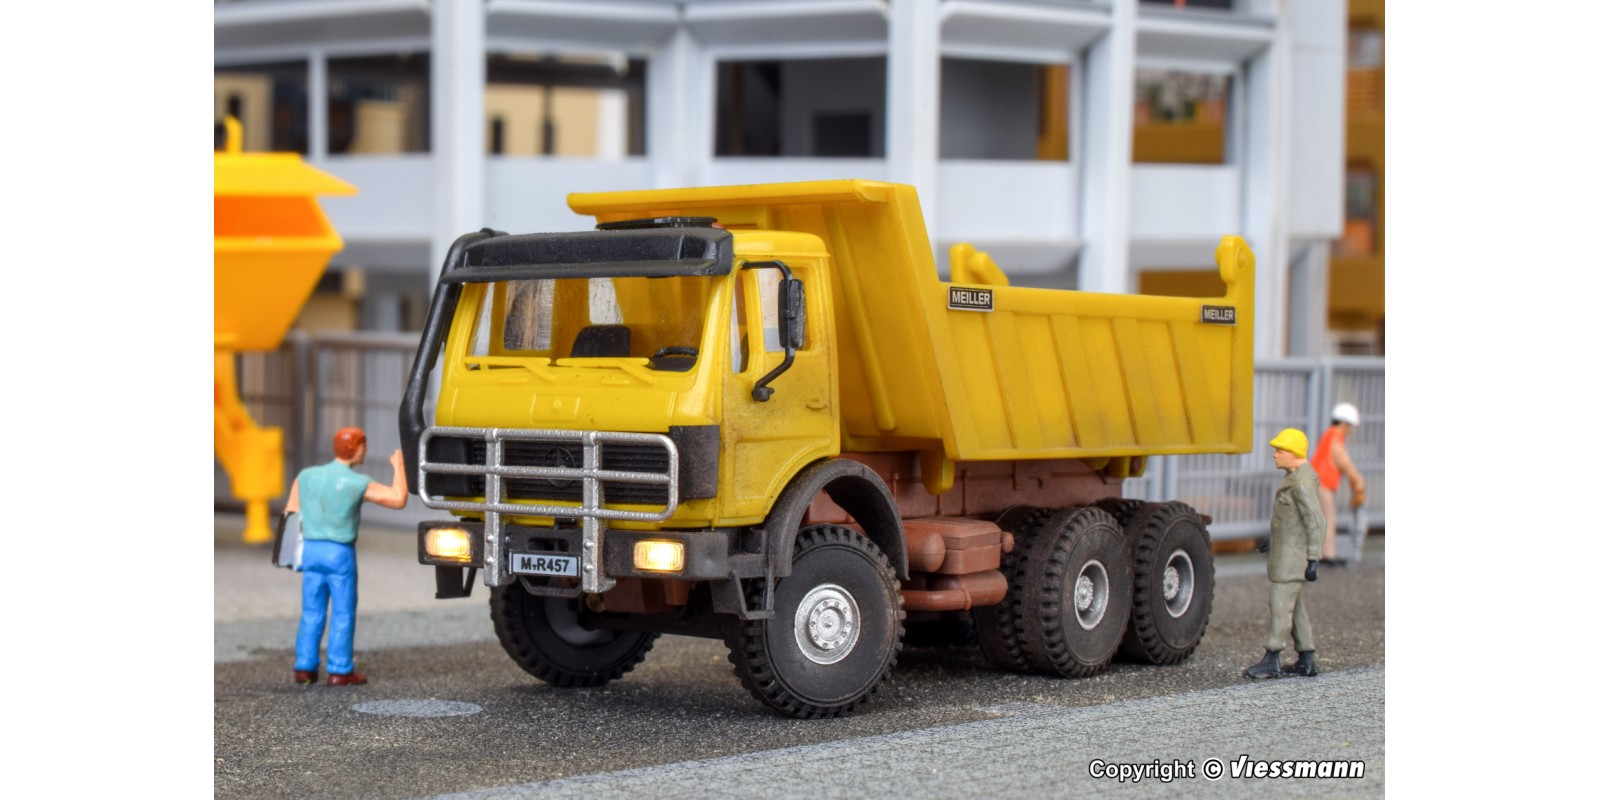 KI14023 H0 MB MEILLER 3-axle tipper, with LED lighting, front steering axle, functional kit